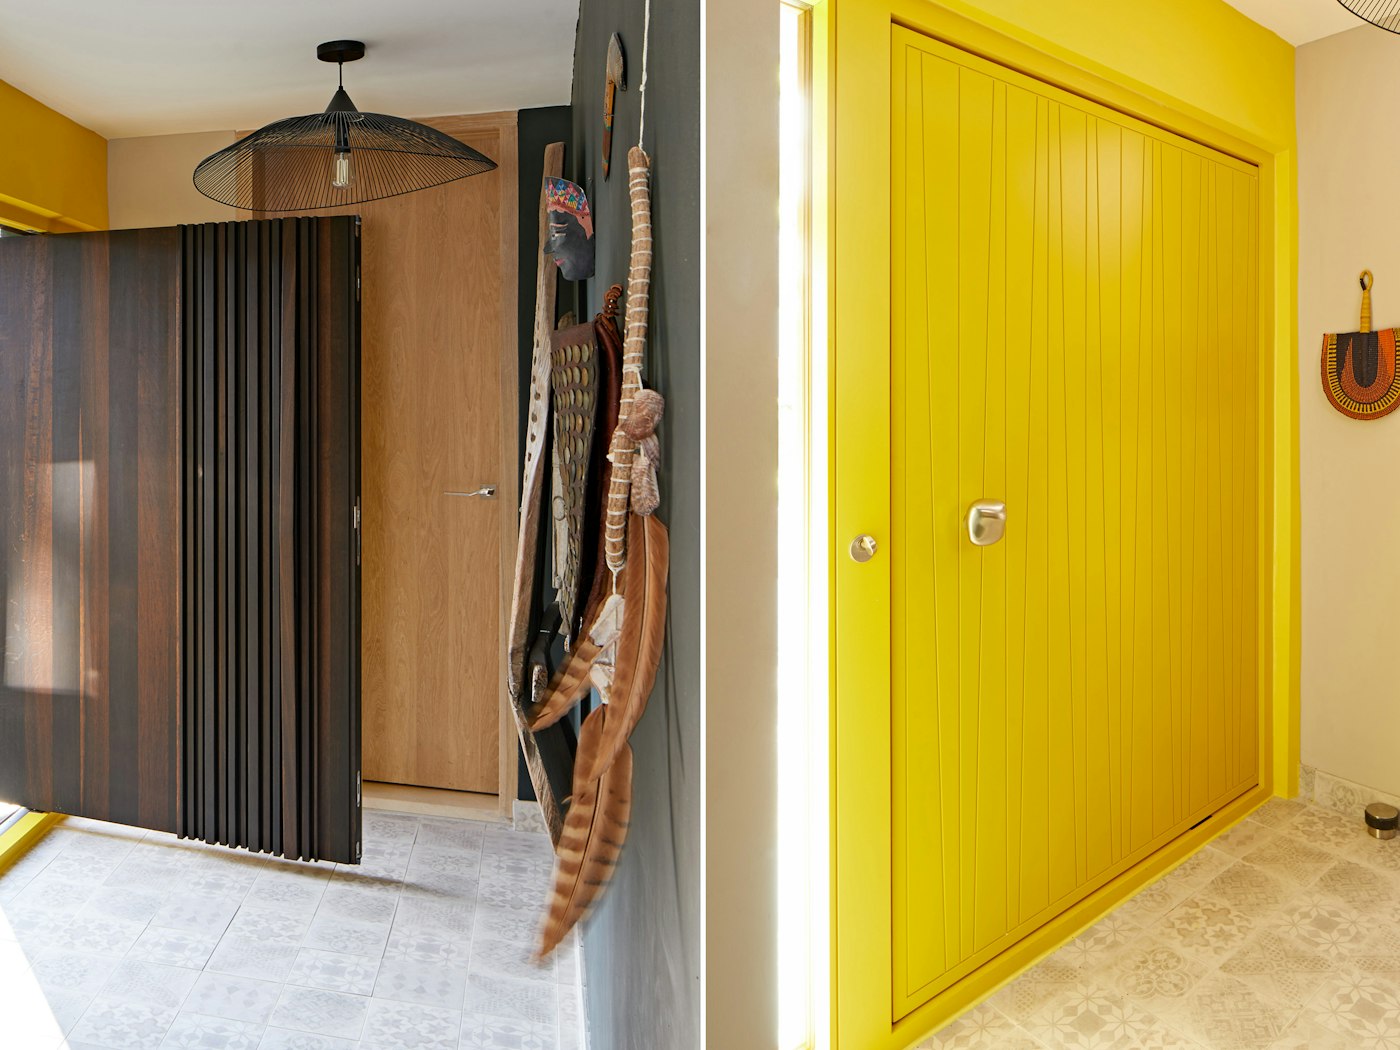 Choosing a new front door comes with a world of possibility - the Assafs chose a bold dual solution with different designs and finishes internally & externally